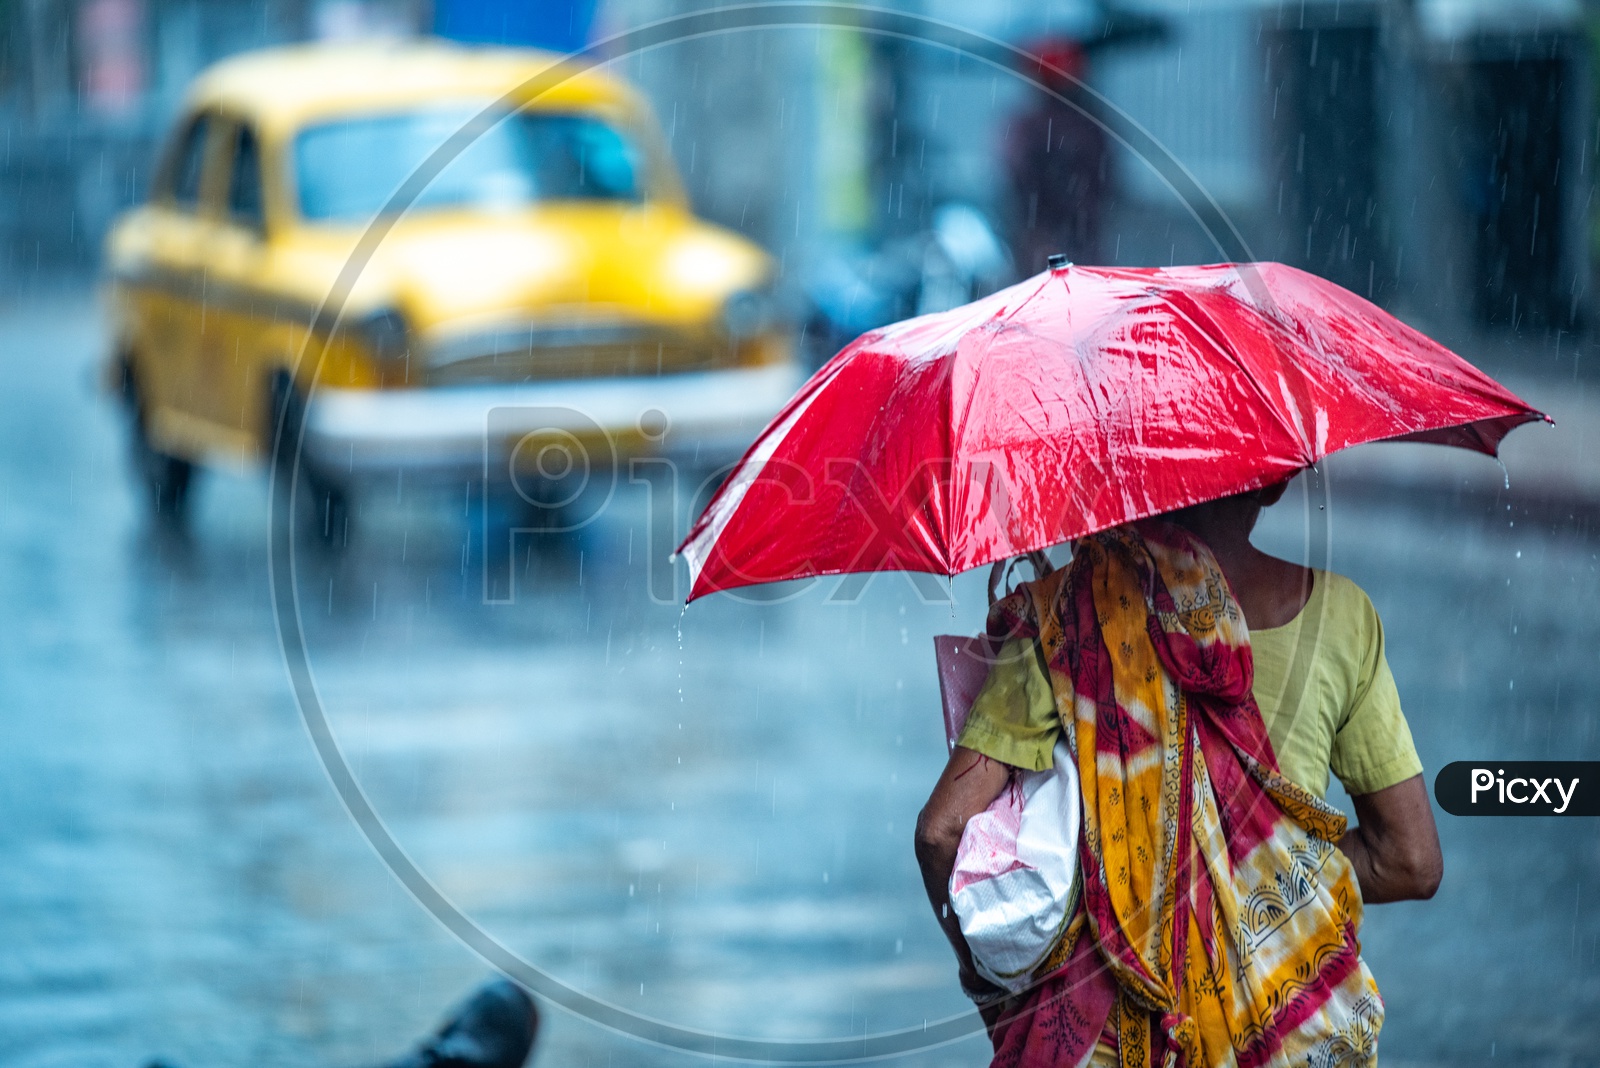 A woman walks holding an umbrella to cover herself from getting drenched as it rains heavily in Howrah,Kolkata.